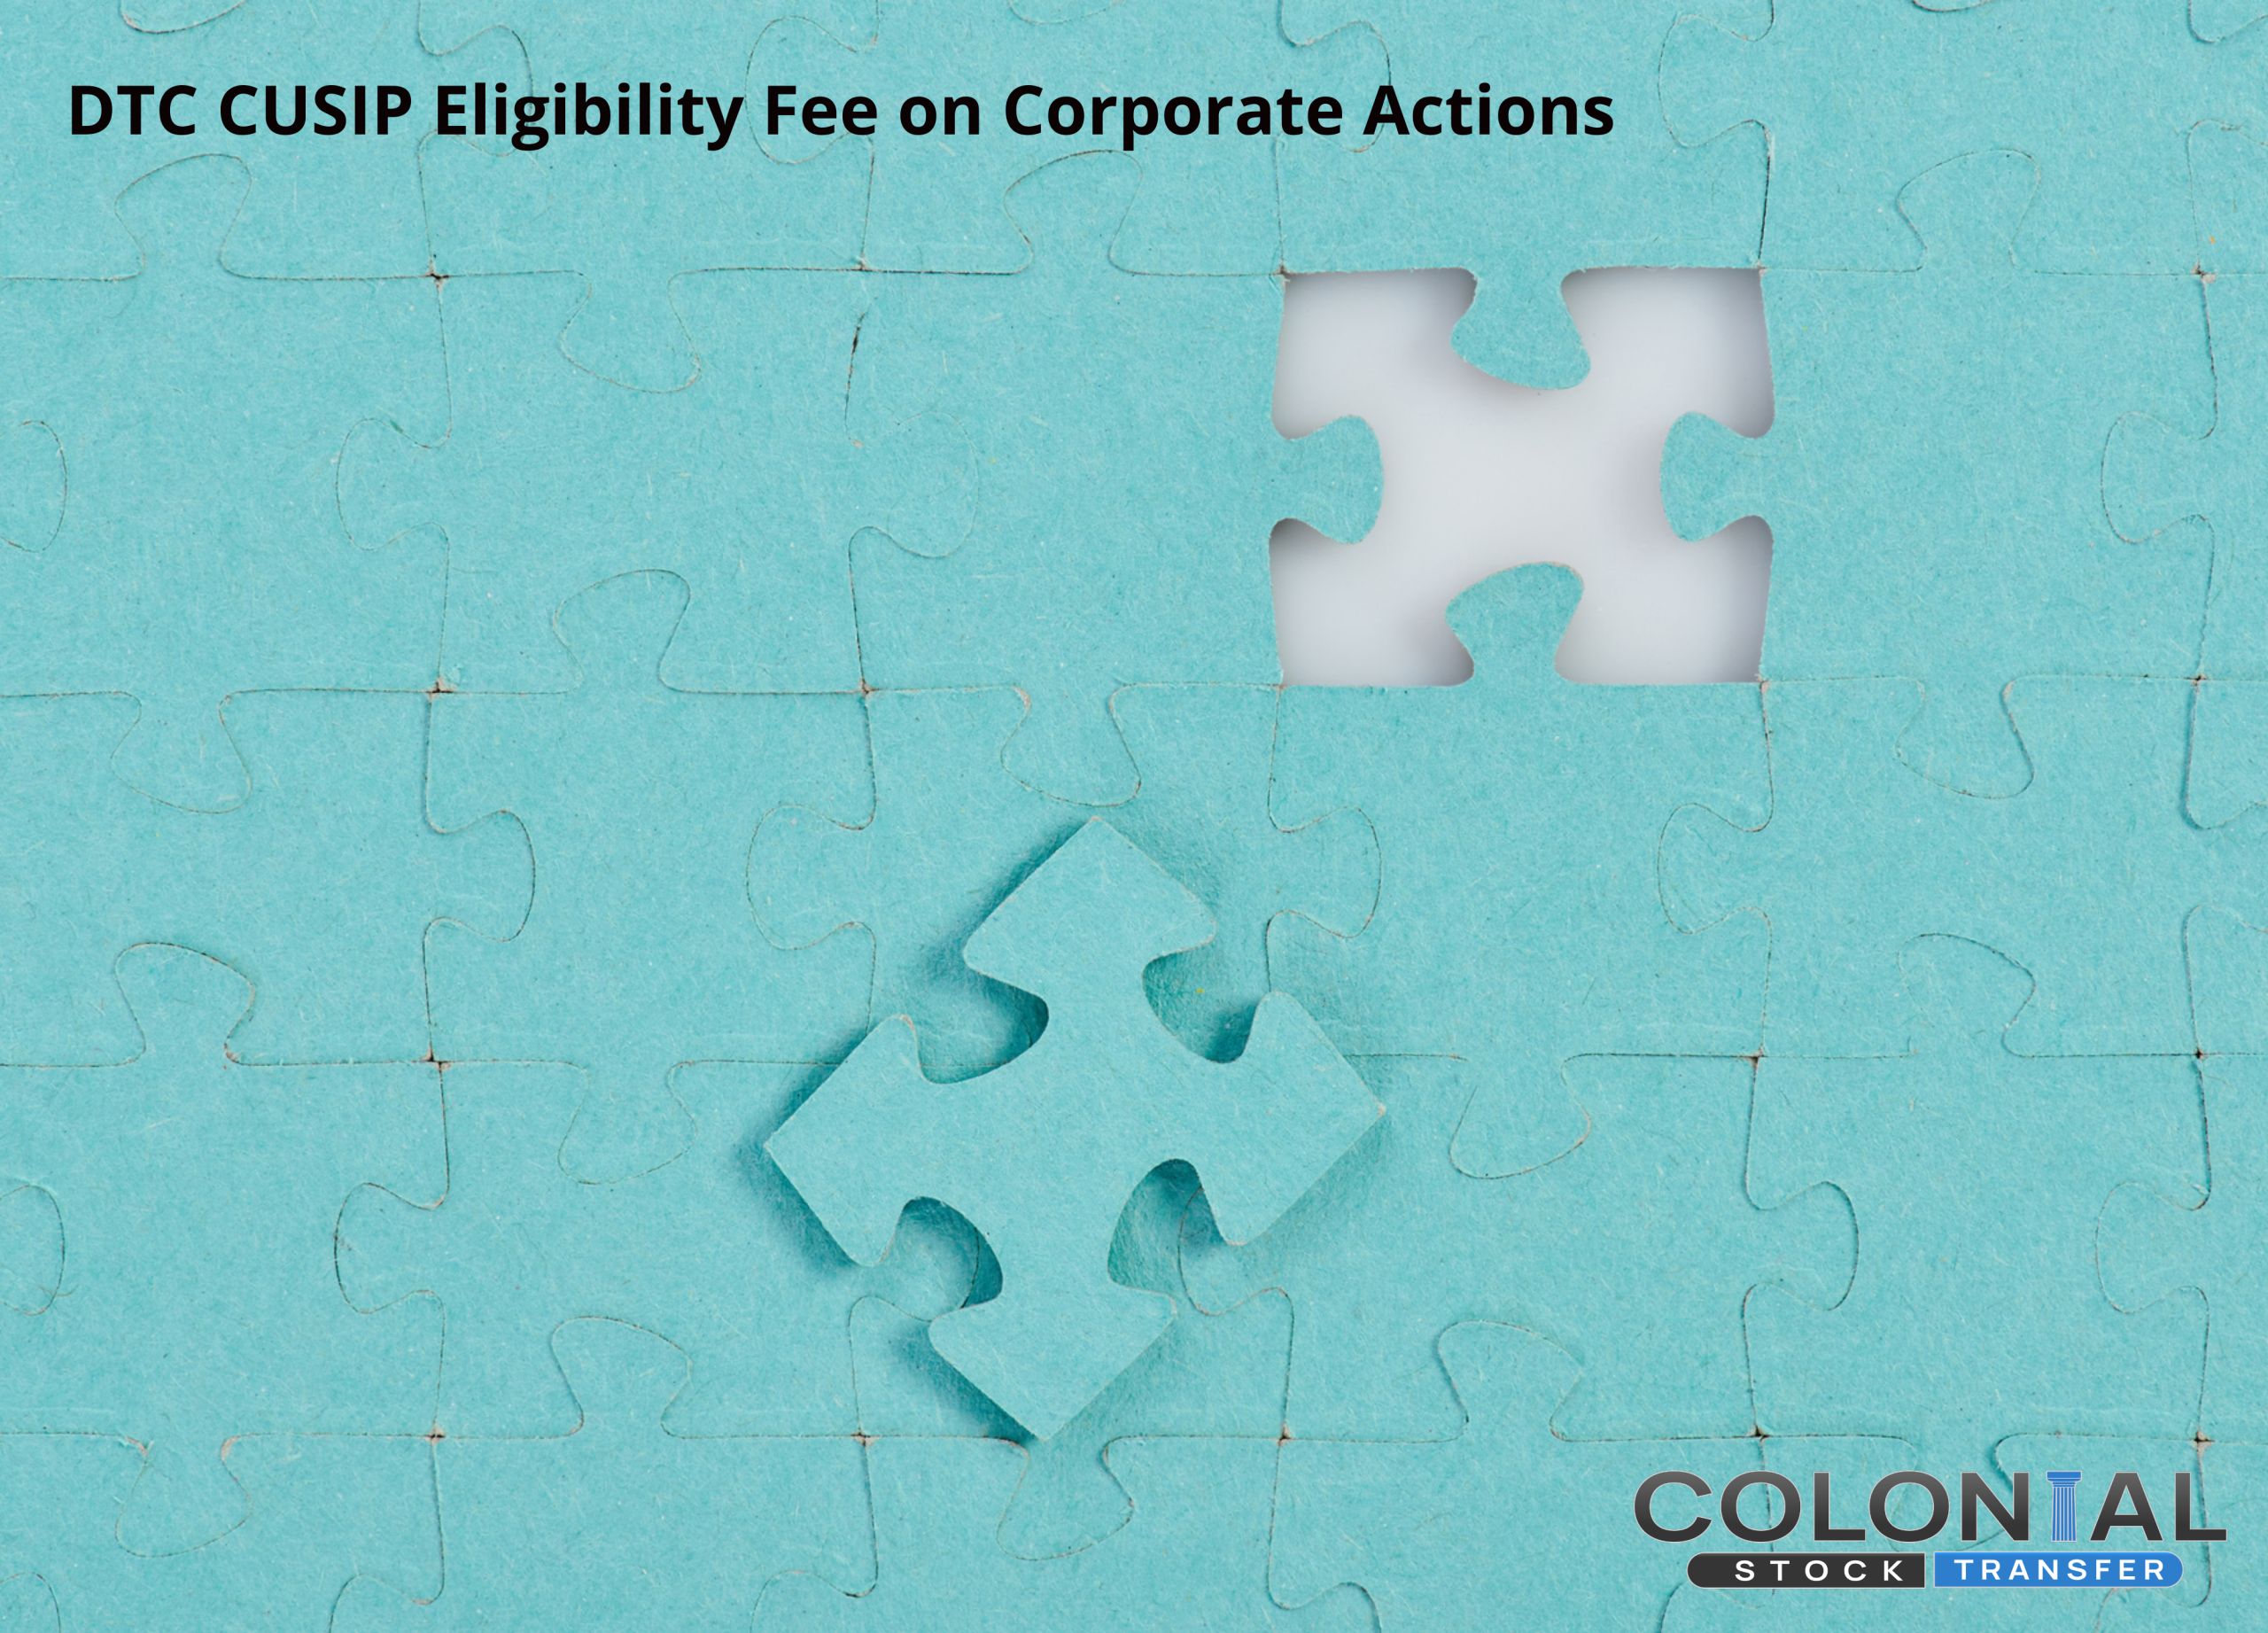 DTC CUSIP Eligibility Fee on Corporate Actions